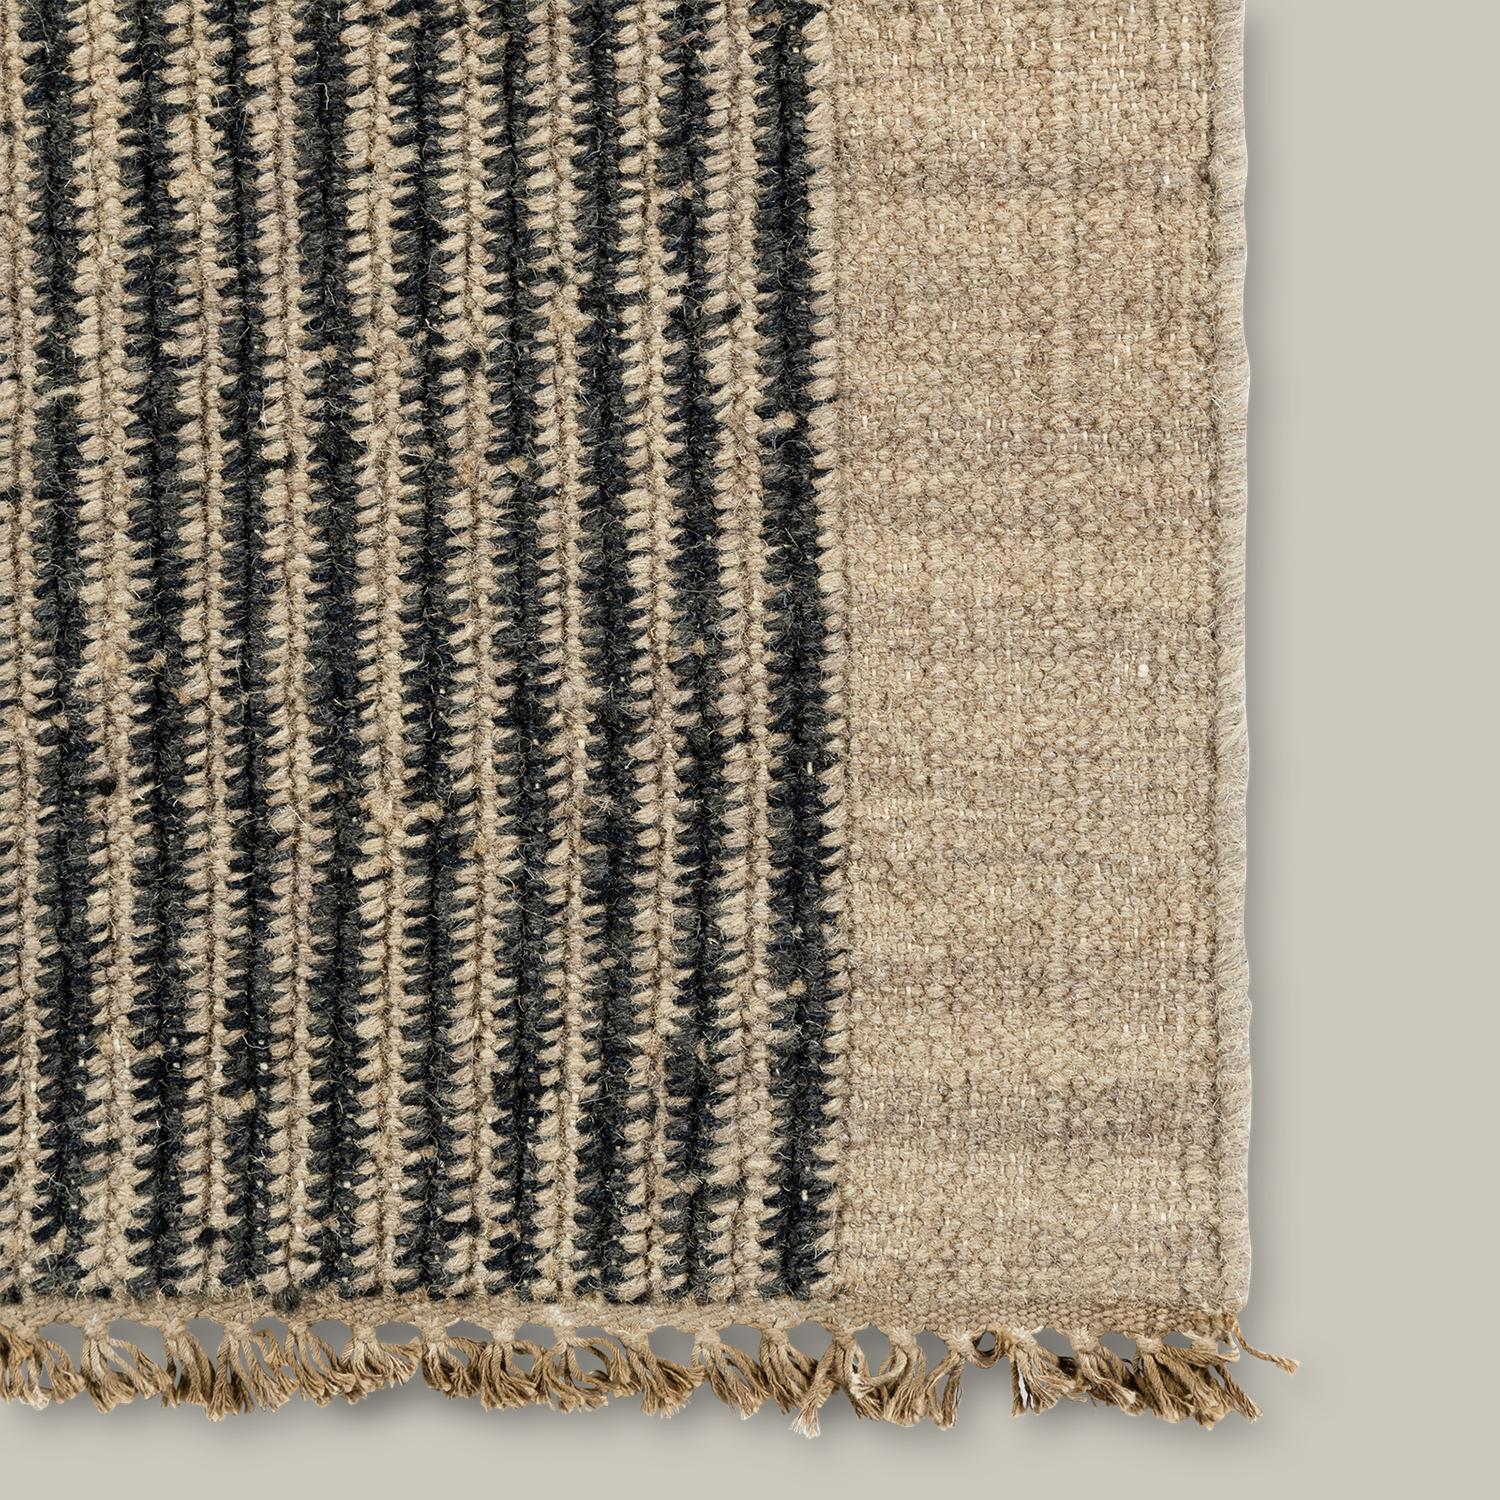 “Metlili Tukar” Bespoke, Handwoven Wool Rug by Christiane Lemieux In New Condition For Sale In New York, NY